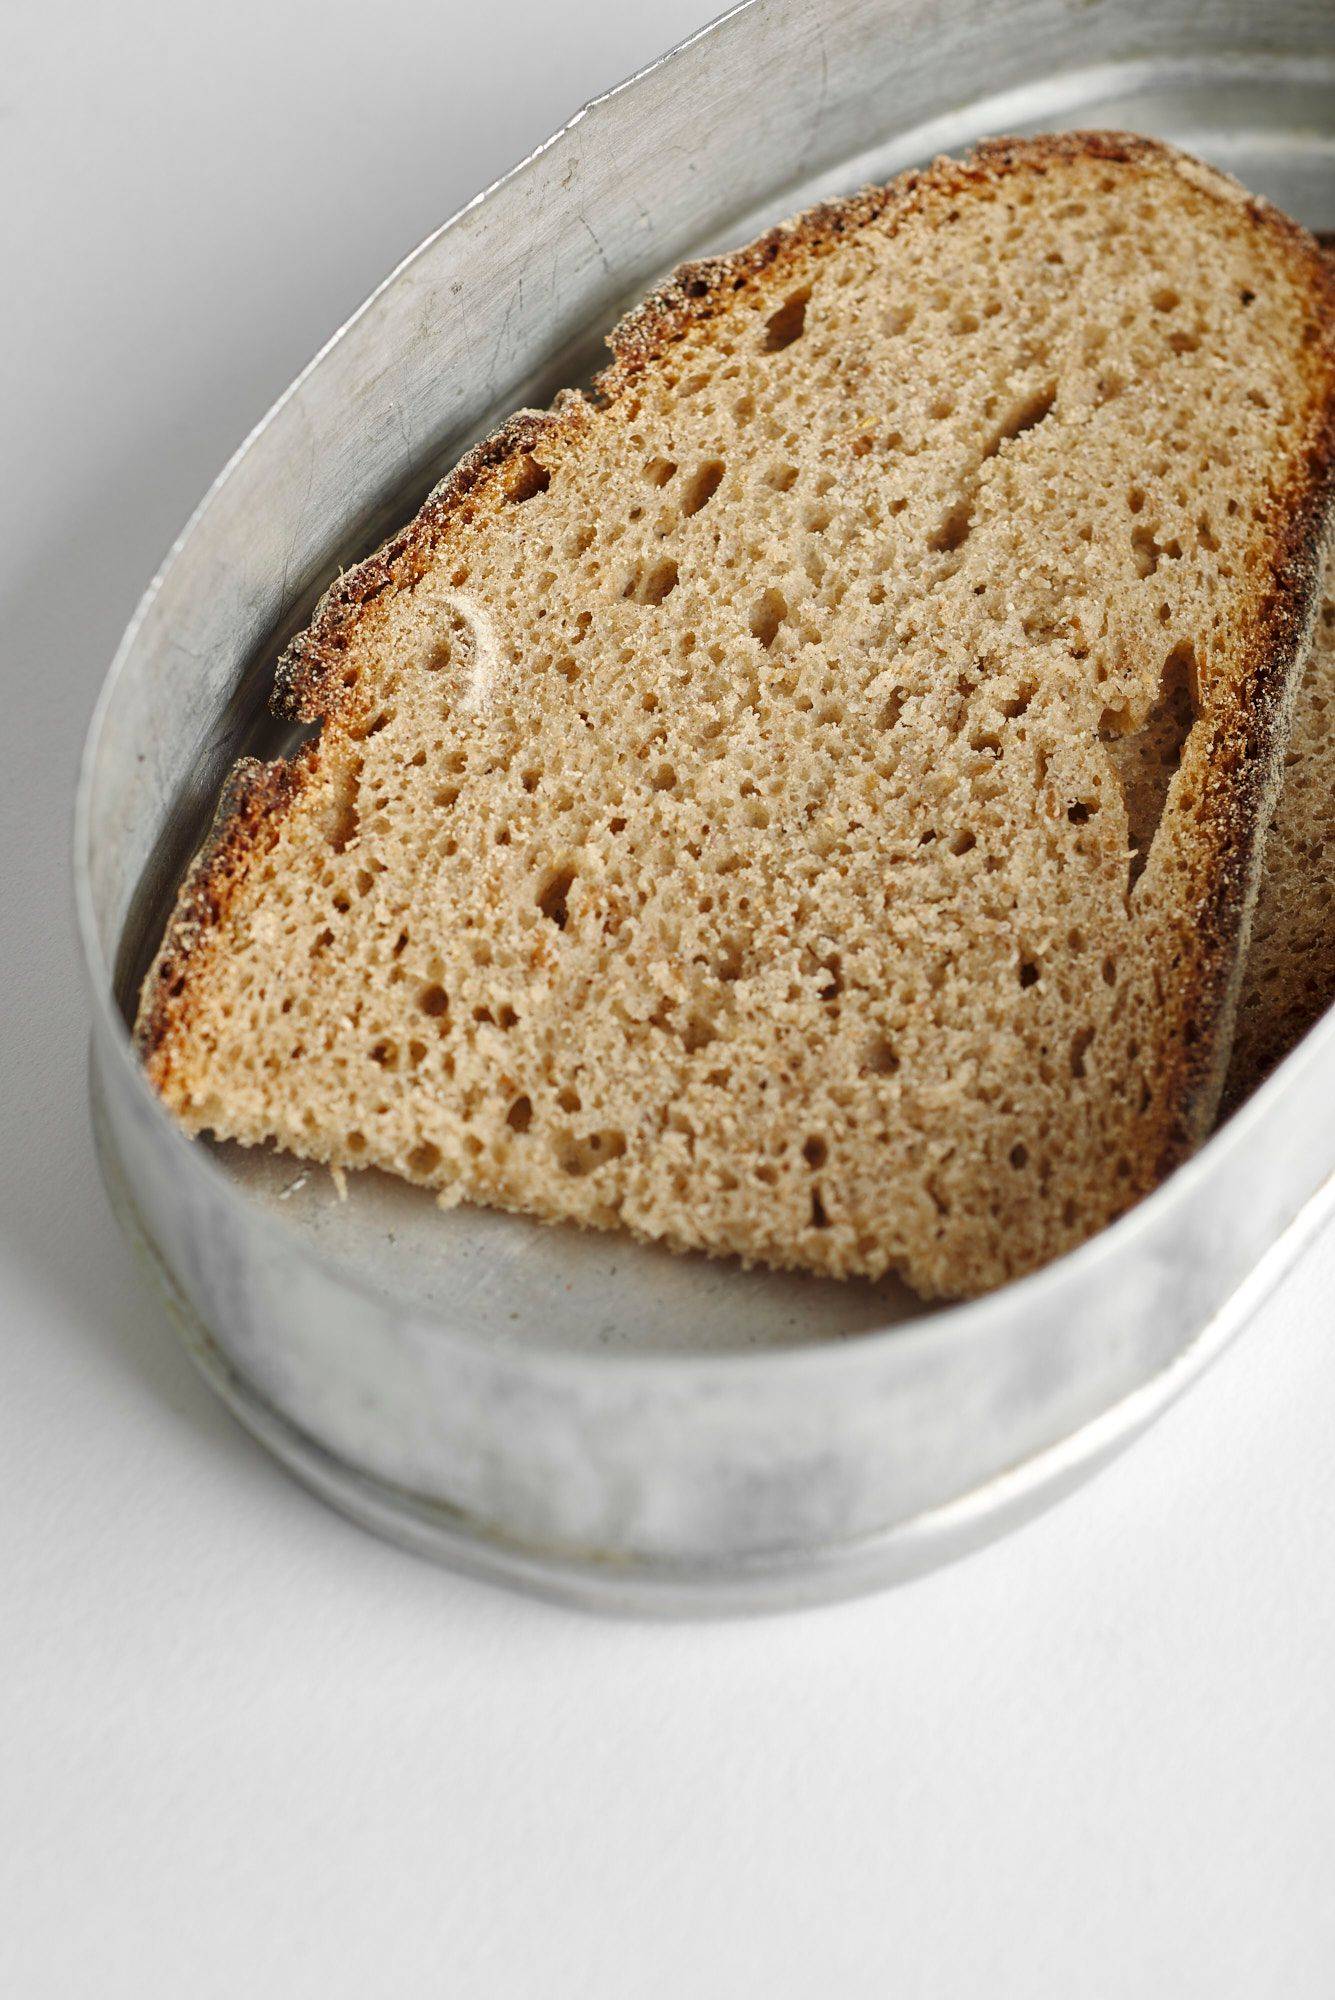 sourdough bread in a vintage lunch box with white background